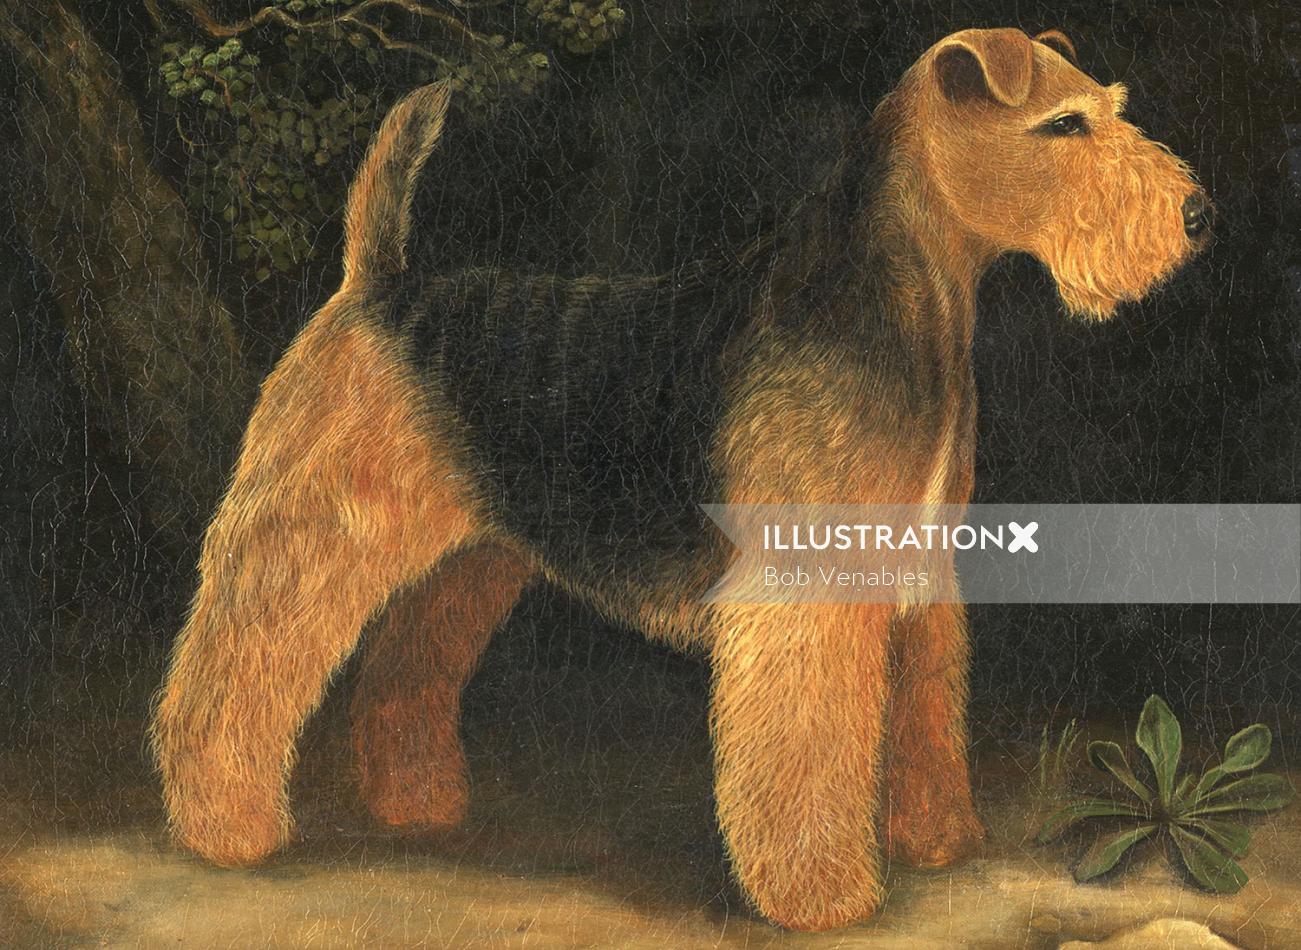 Welsh Terrier Dog painting